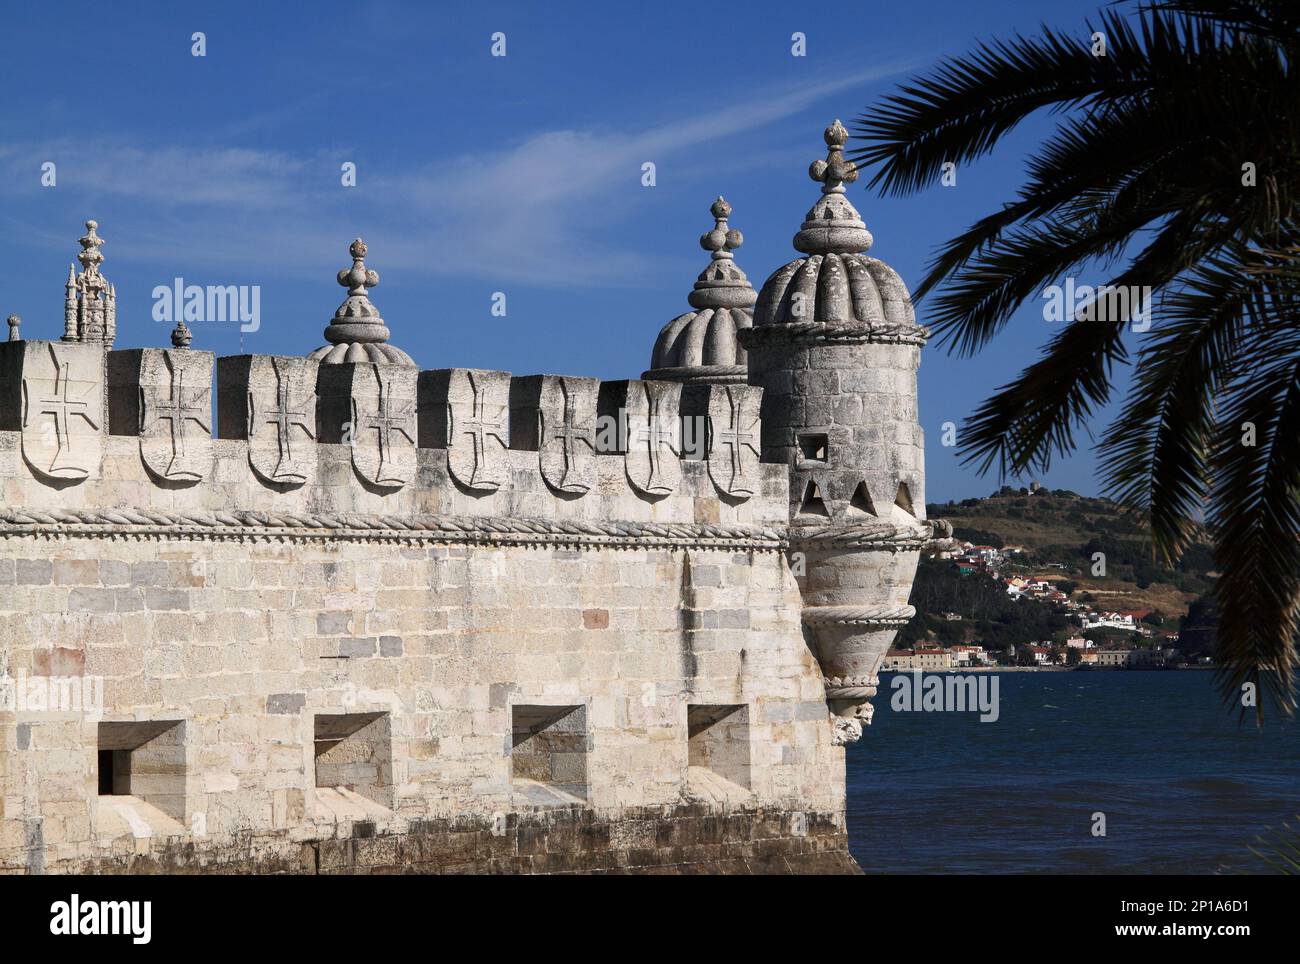 Portugal, Lisbon, Belem District - Tower of Belem Monument from the time of the Portuguese voyages of Discovery - overlooking the River Tagus or Tejo Stock Photo